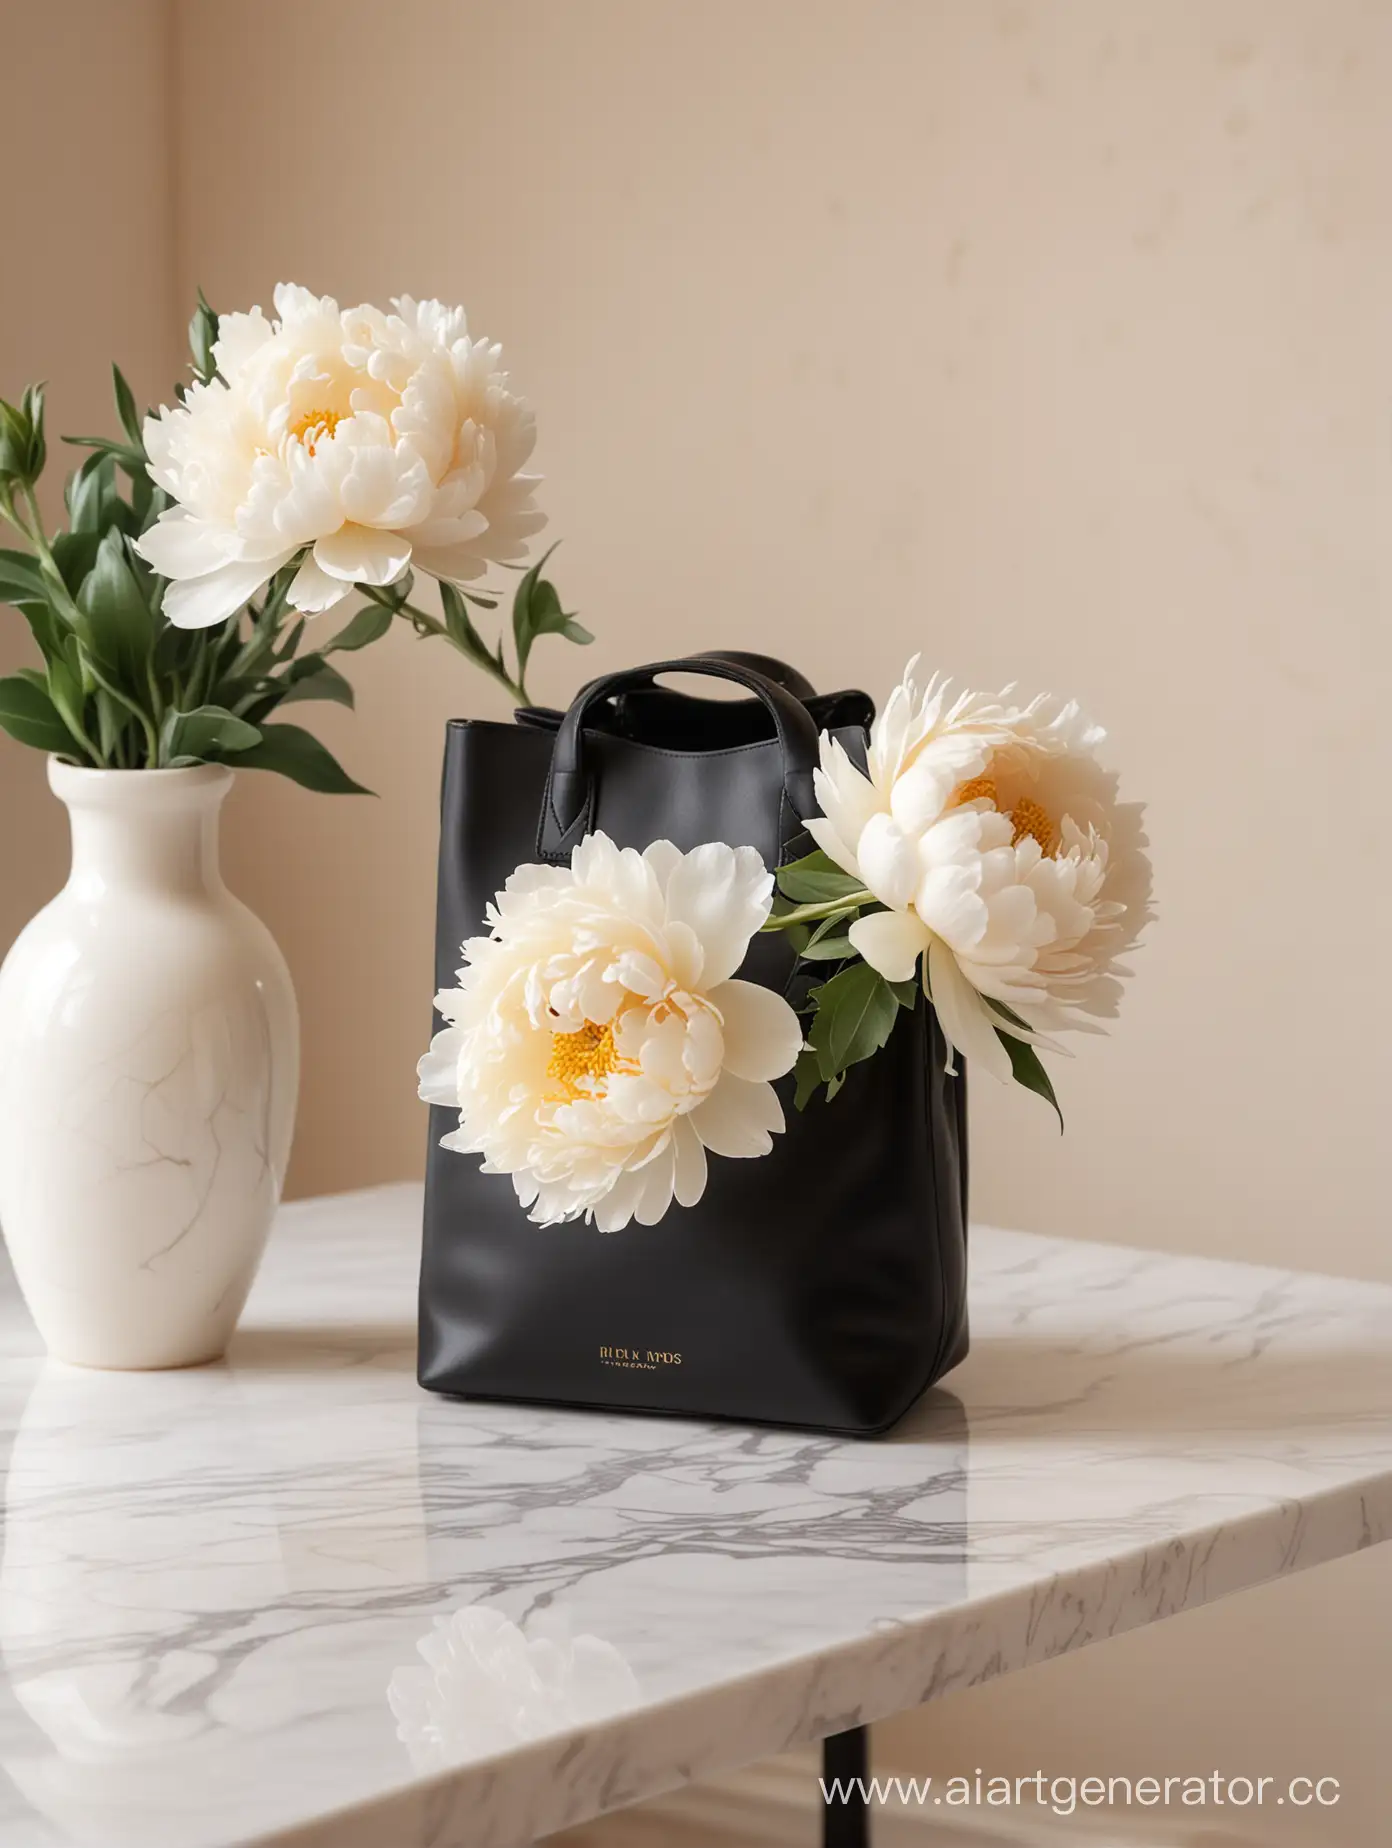 realistic close-up photo: a black mini bag stands on a long white marble table with black legs, on the table a small bouquet of white pions in a white vase. The background is a minimalistic room with light peach wallpaper, illuminated by warm and gentle light